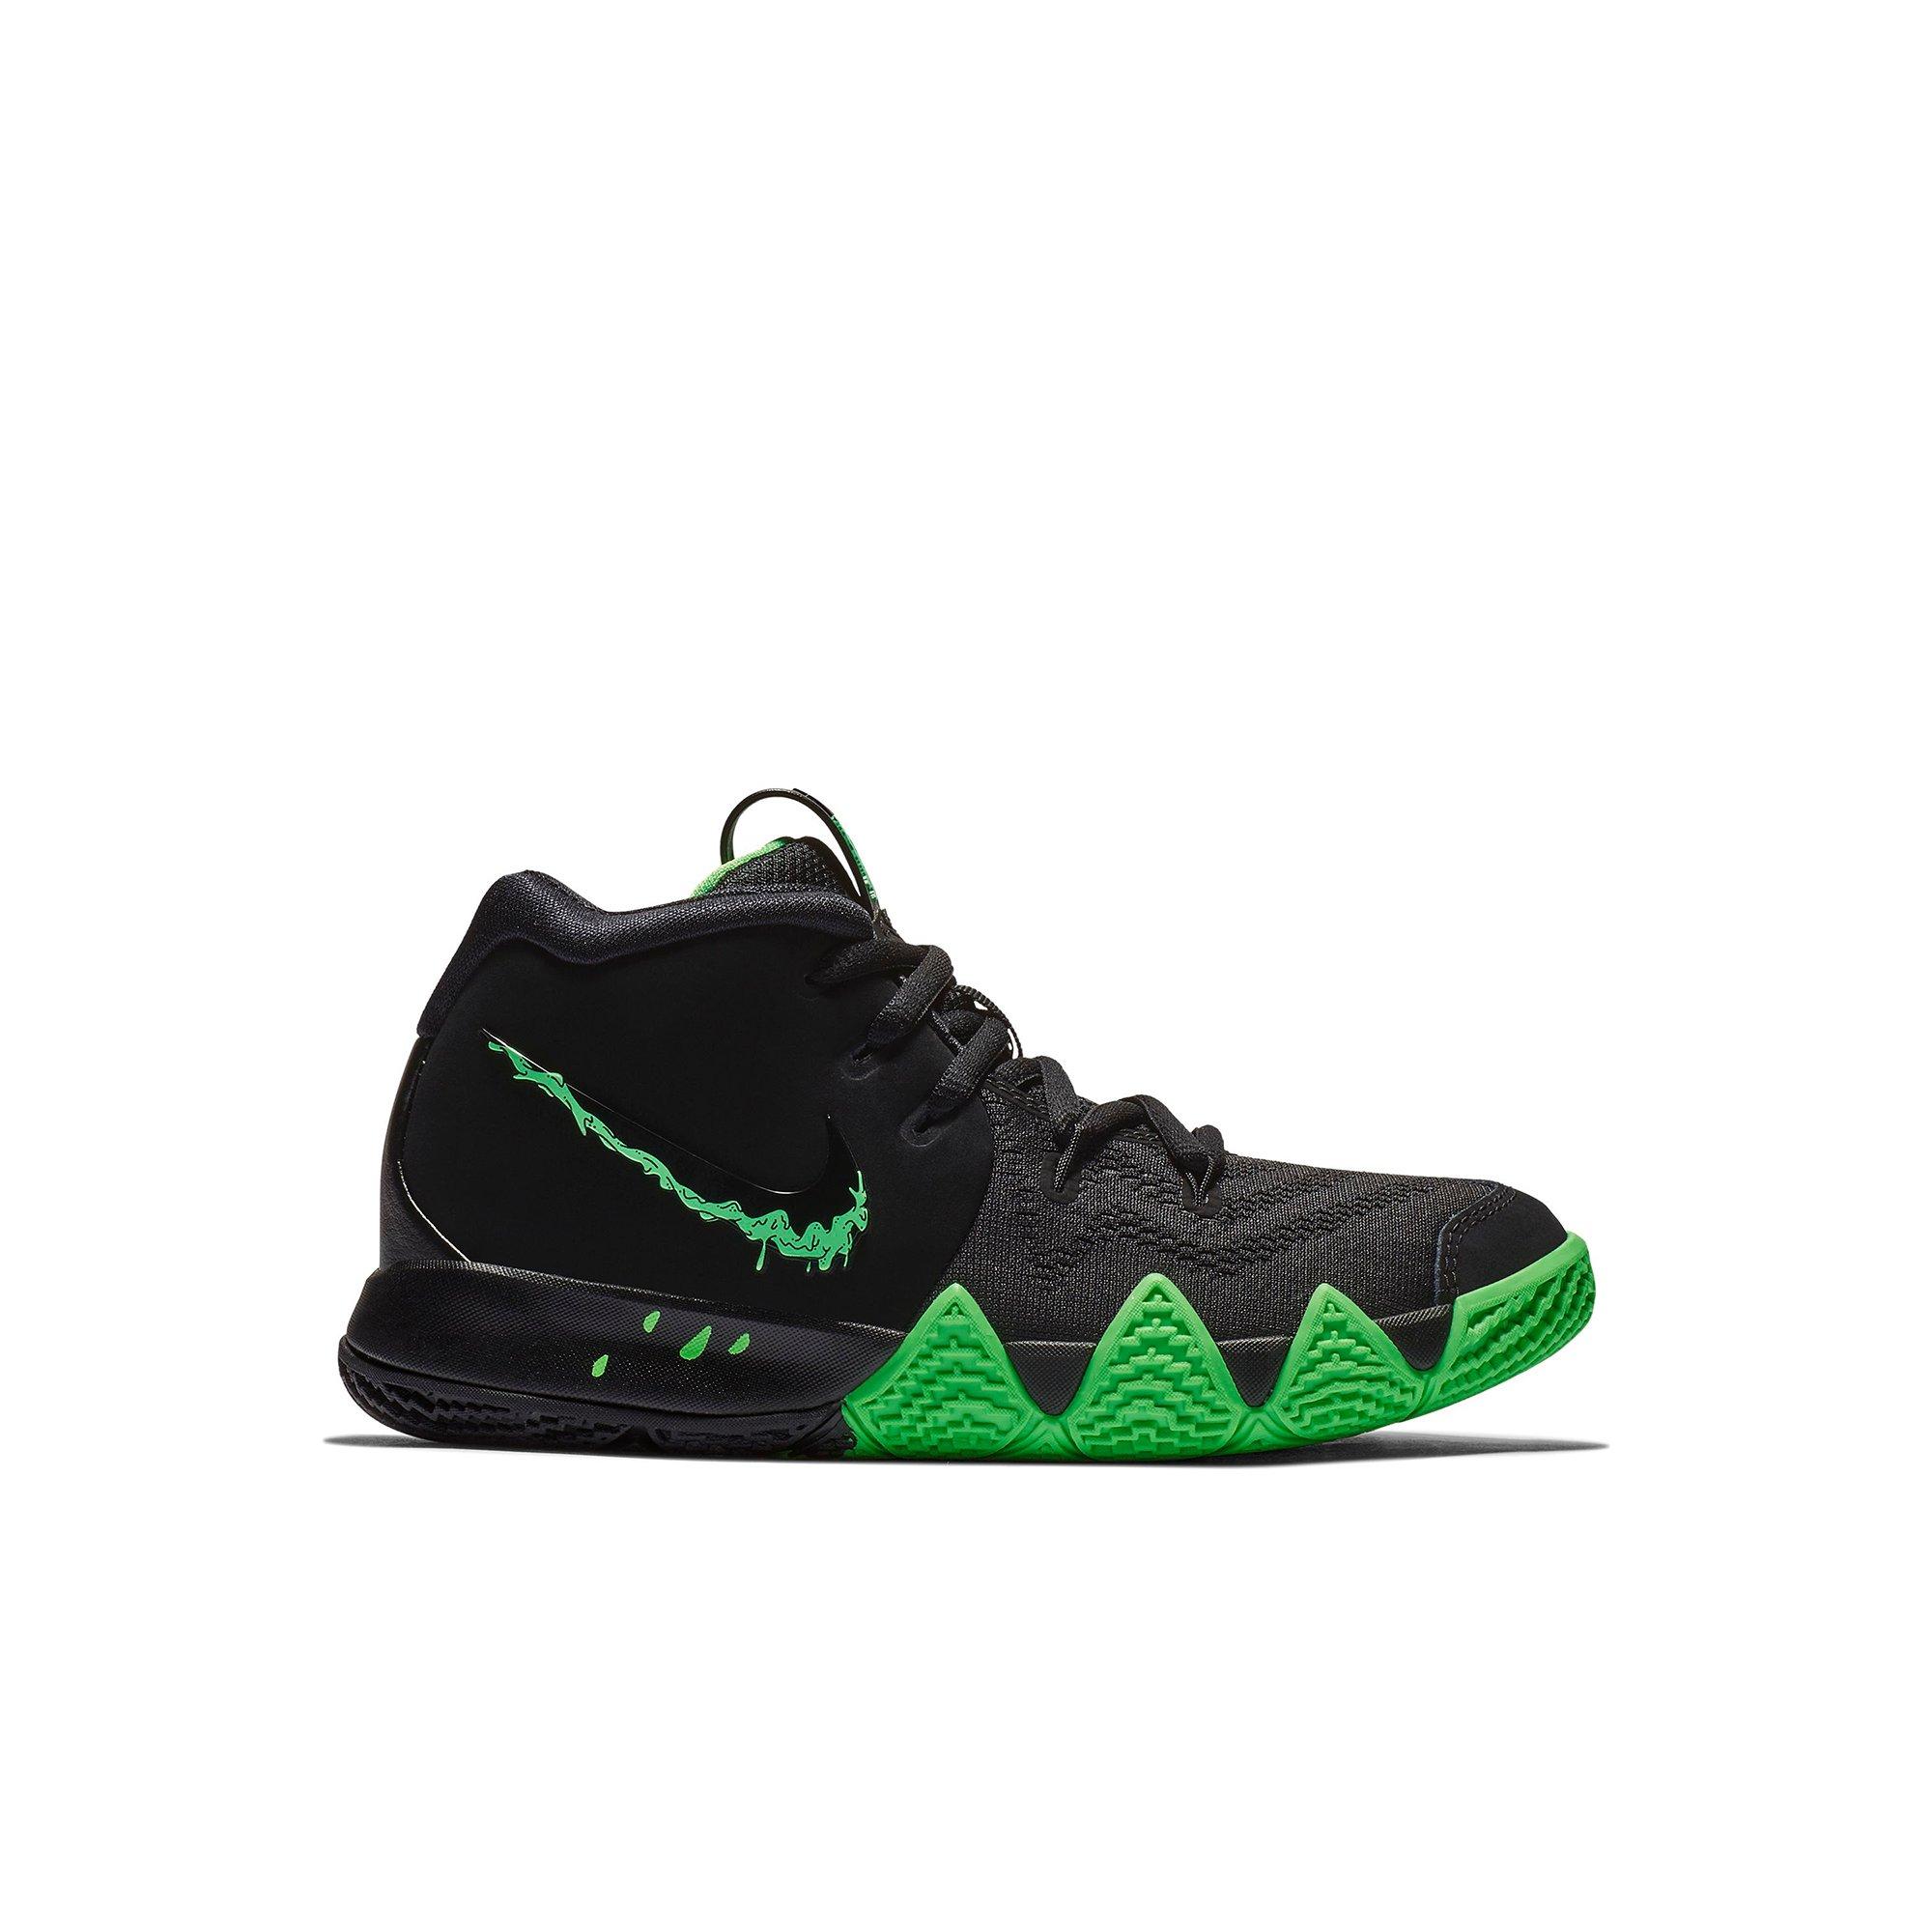 kyrie irving shoes black and green